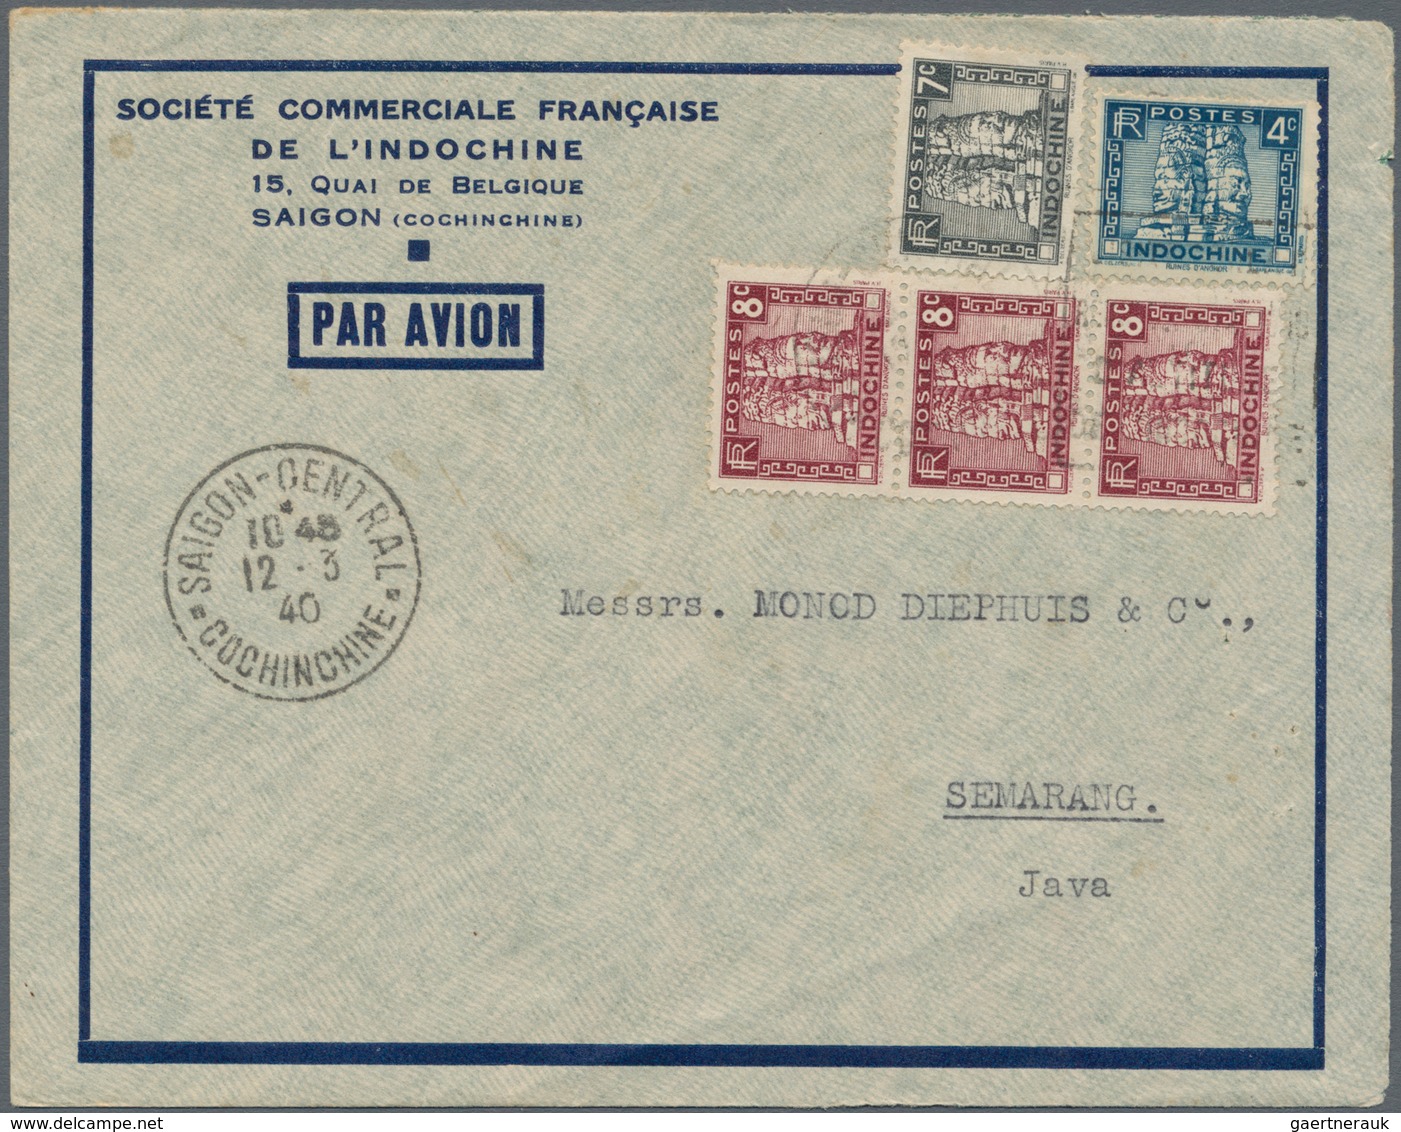 Französisch-Indochina: 1931/40, air mail covers by Air Orient / Air France (26 inc. two airletters,